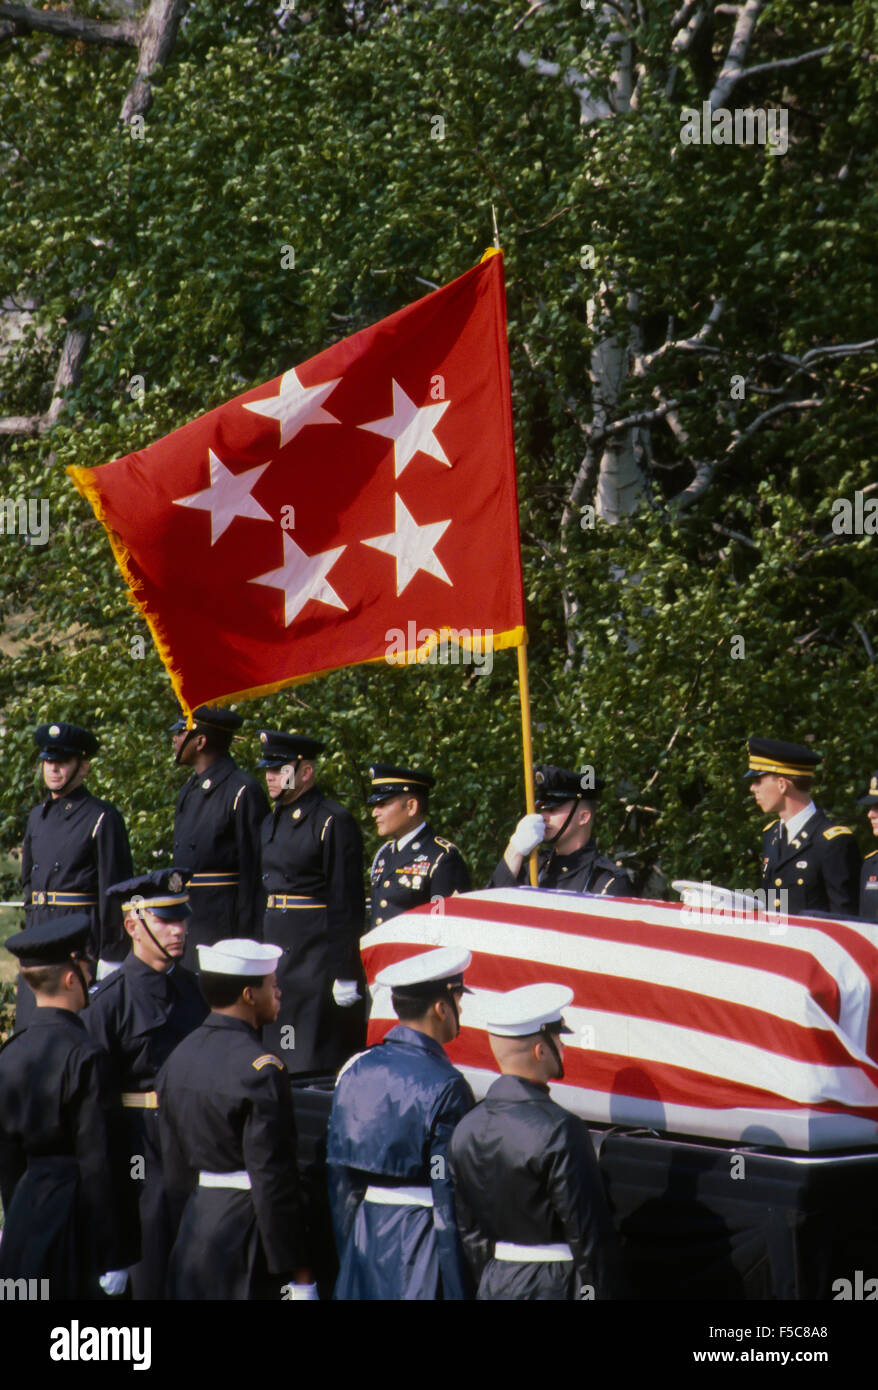 Arlington, Virginia.  4-14-1981  Funeral services for General of the Army Omar Bradley. The General's casket is carried by the funeral detail to the grave site. The General's 5 star  flag donating his rank as a General of the Army  is held over the casket for the final time.  Credit: Mark Reinstein Stock Photo